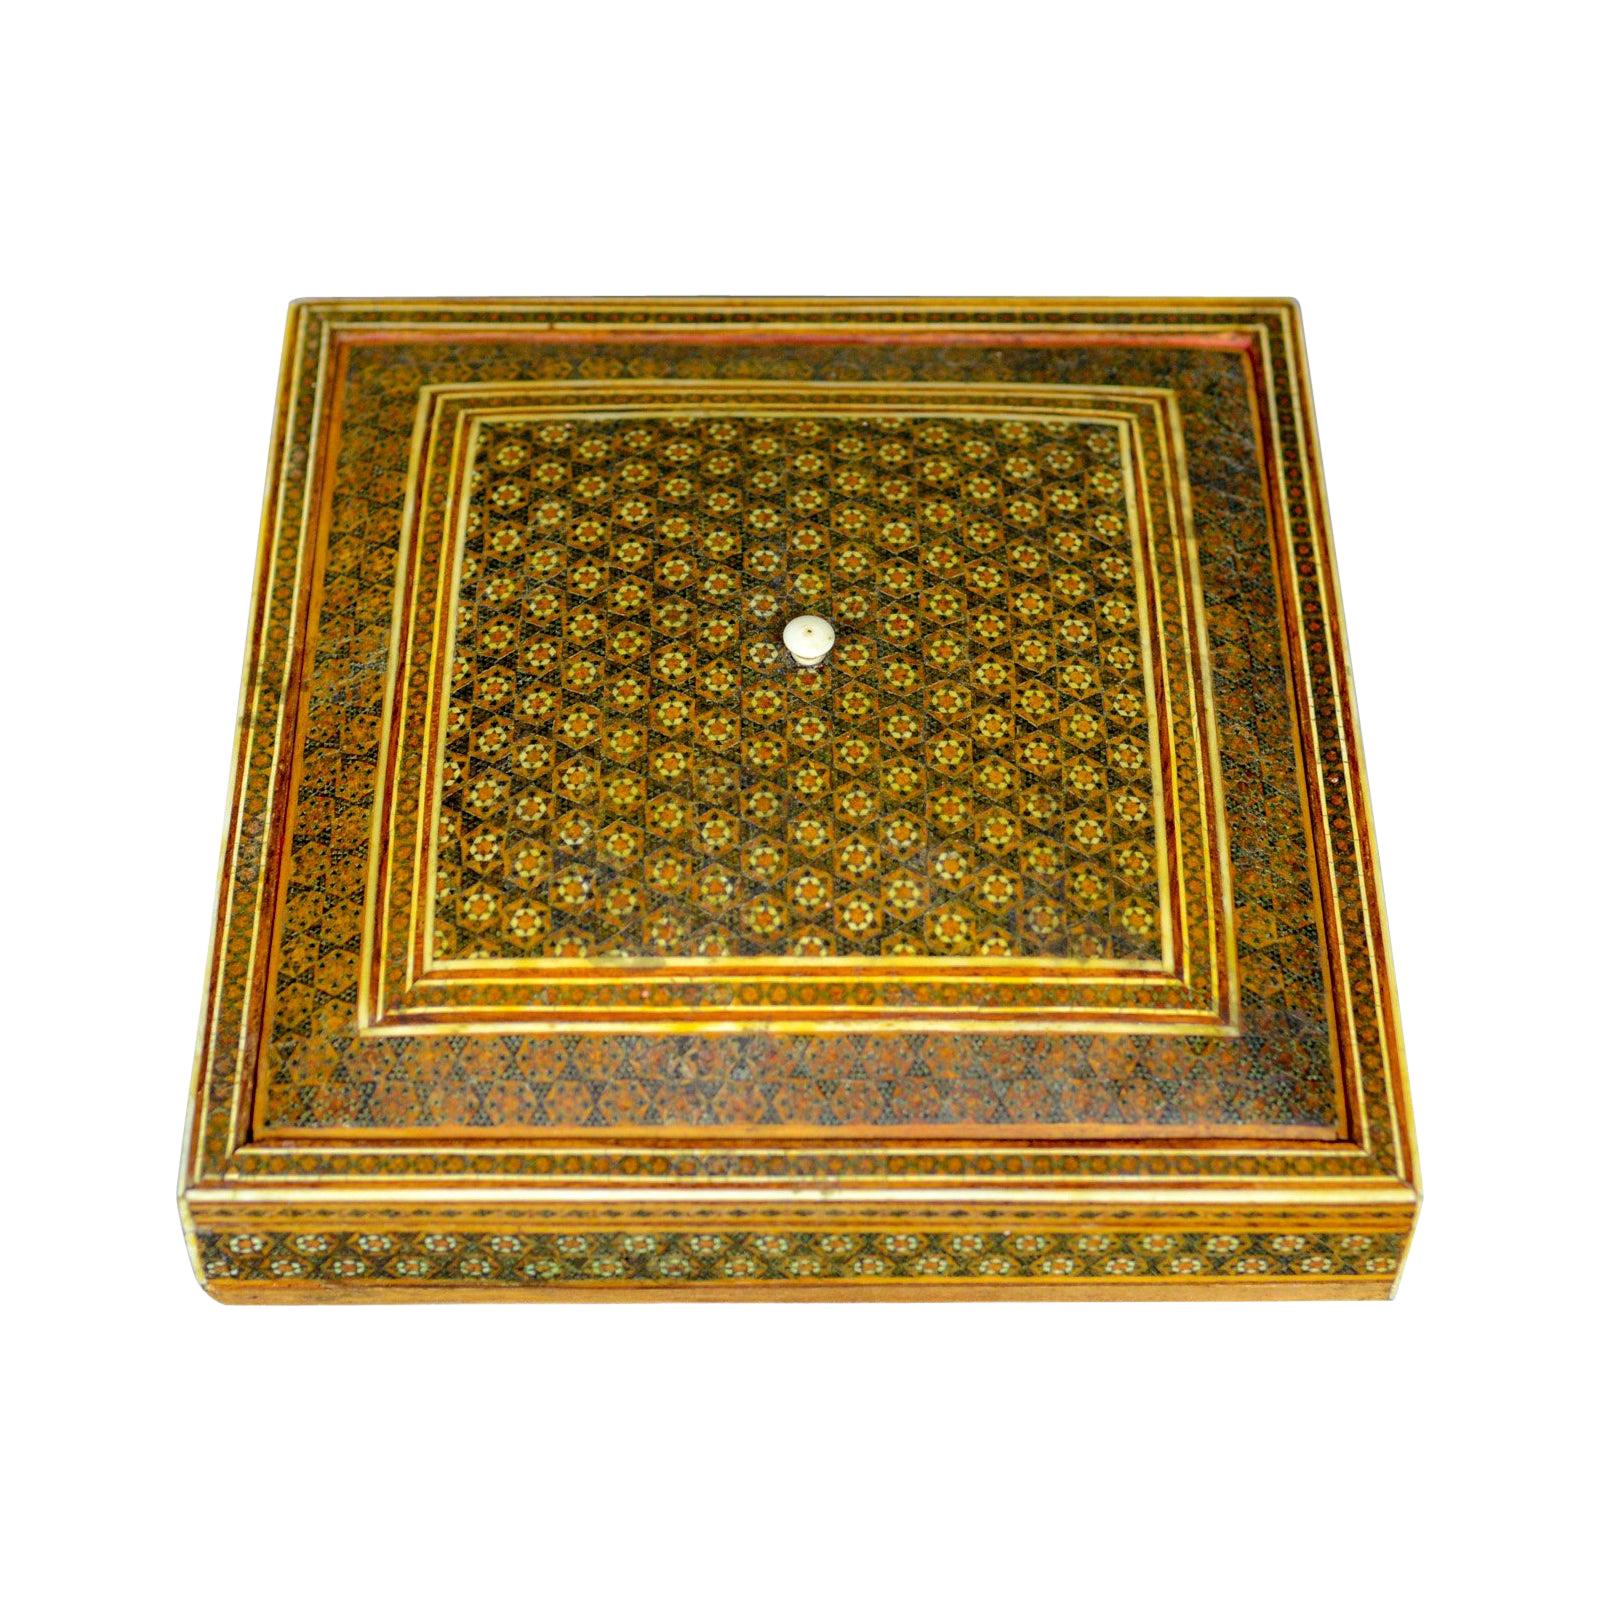 Antique Sadeli Ware Box, Anglo-Indian, Jewelry, Late 19th Century